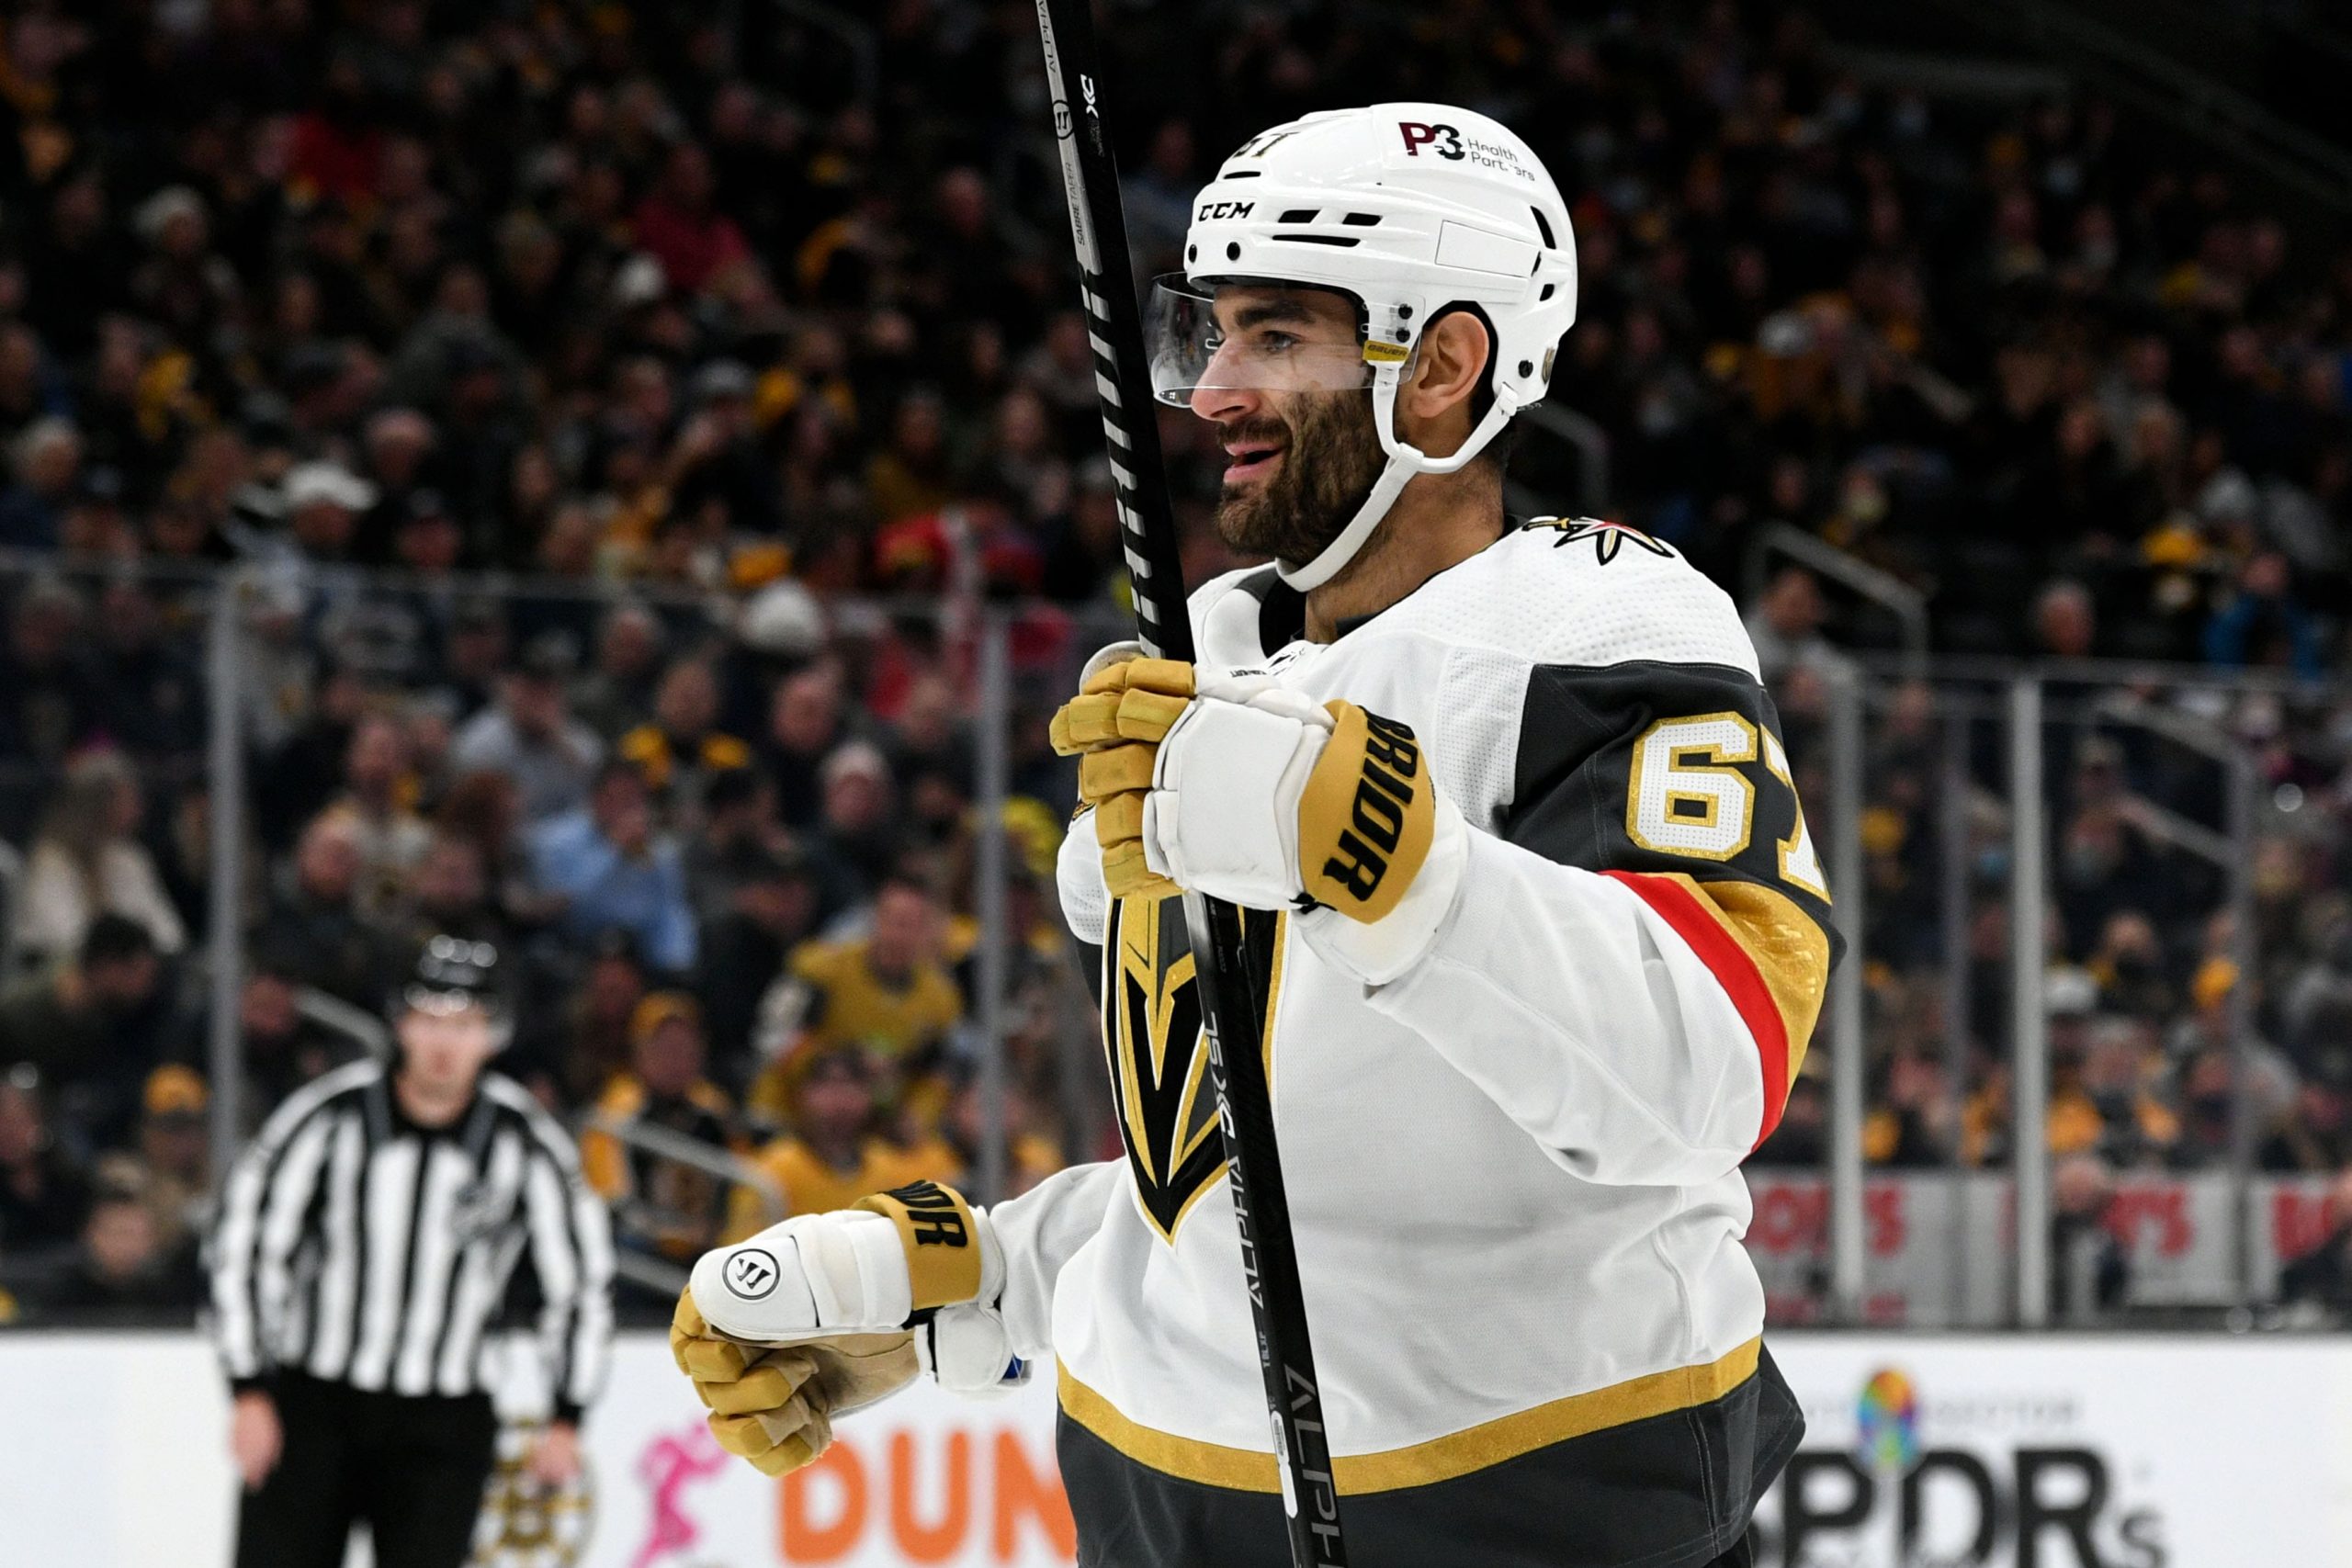 Vegas Golden Knights left wing Max Pacioretty (67) reacts after scoring against the Boston Bruins during the second period at the TD Garden. Mandatory Credit: Brian Fluharty-USA TODAY Sports